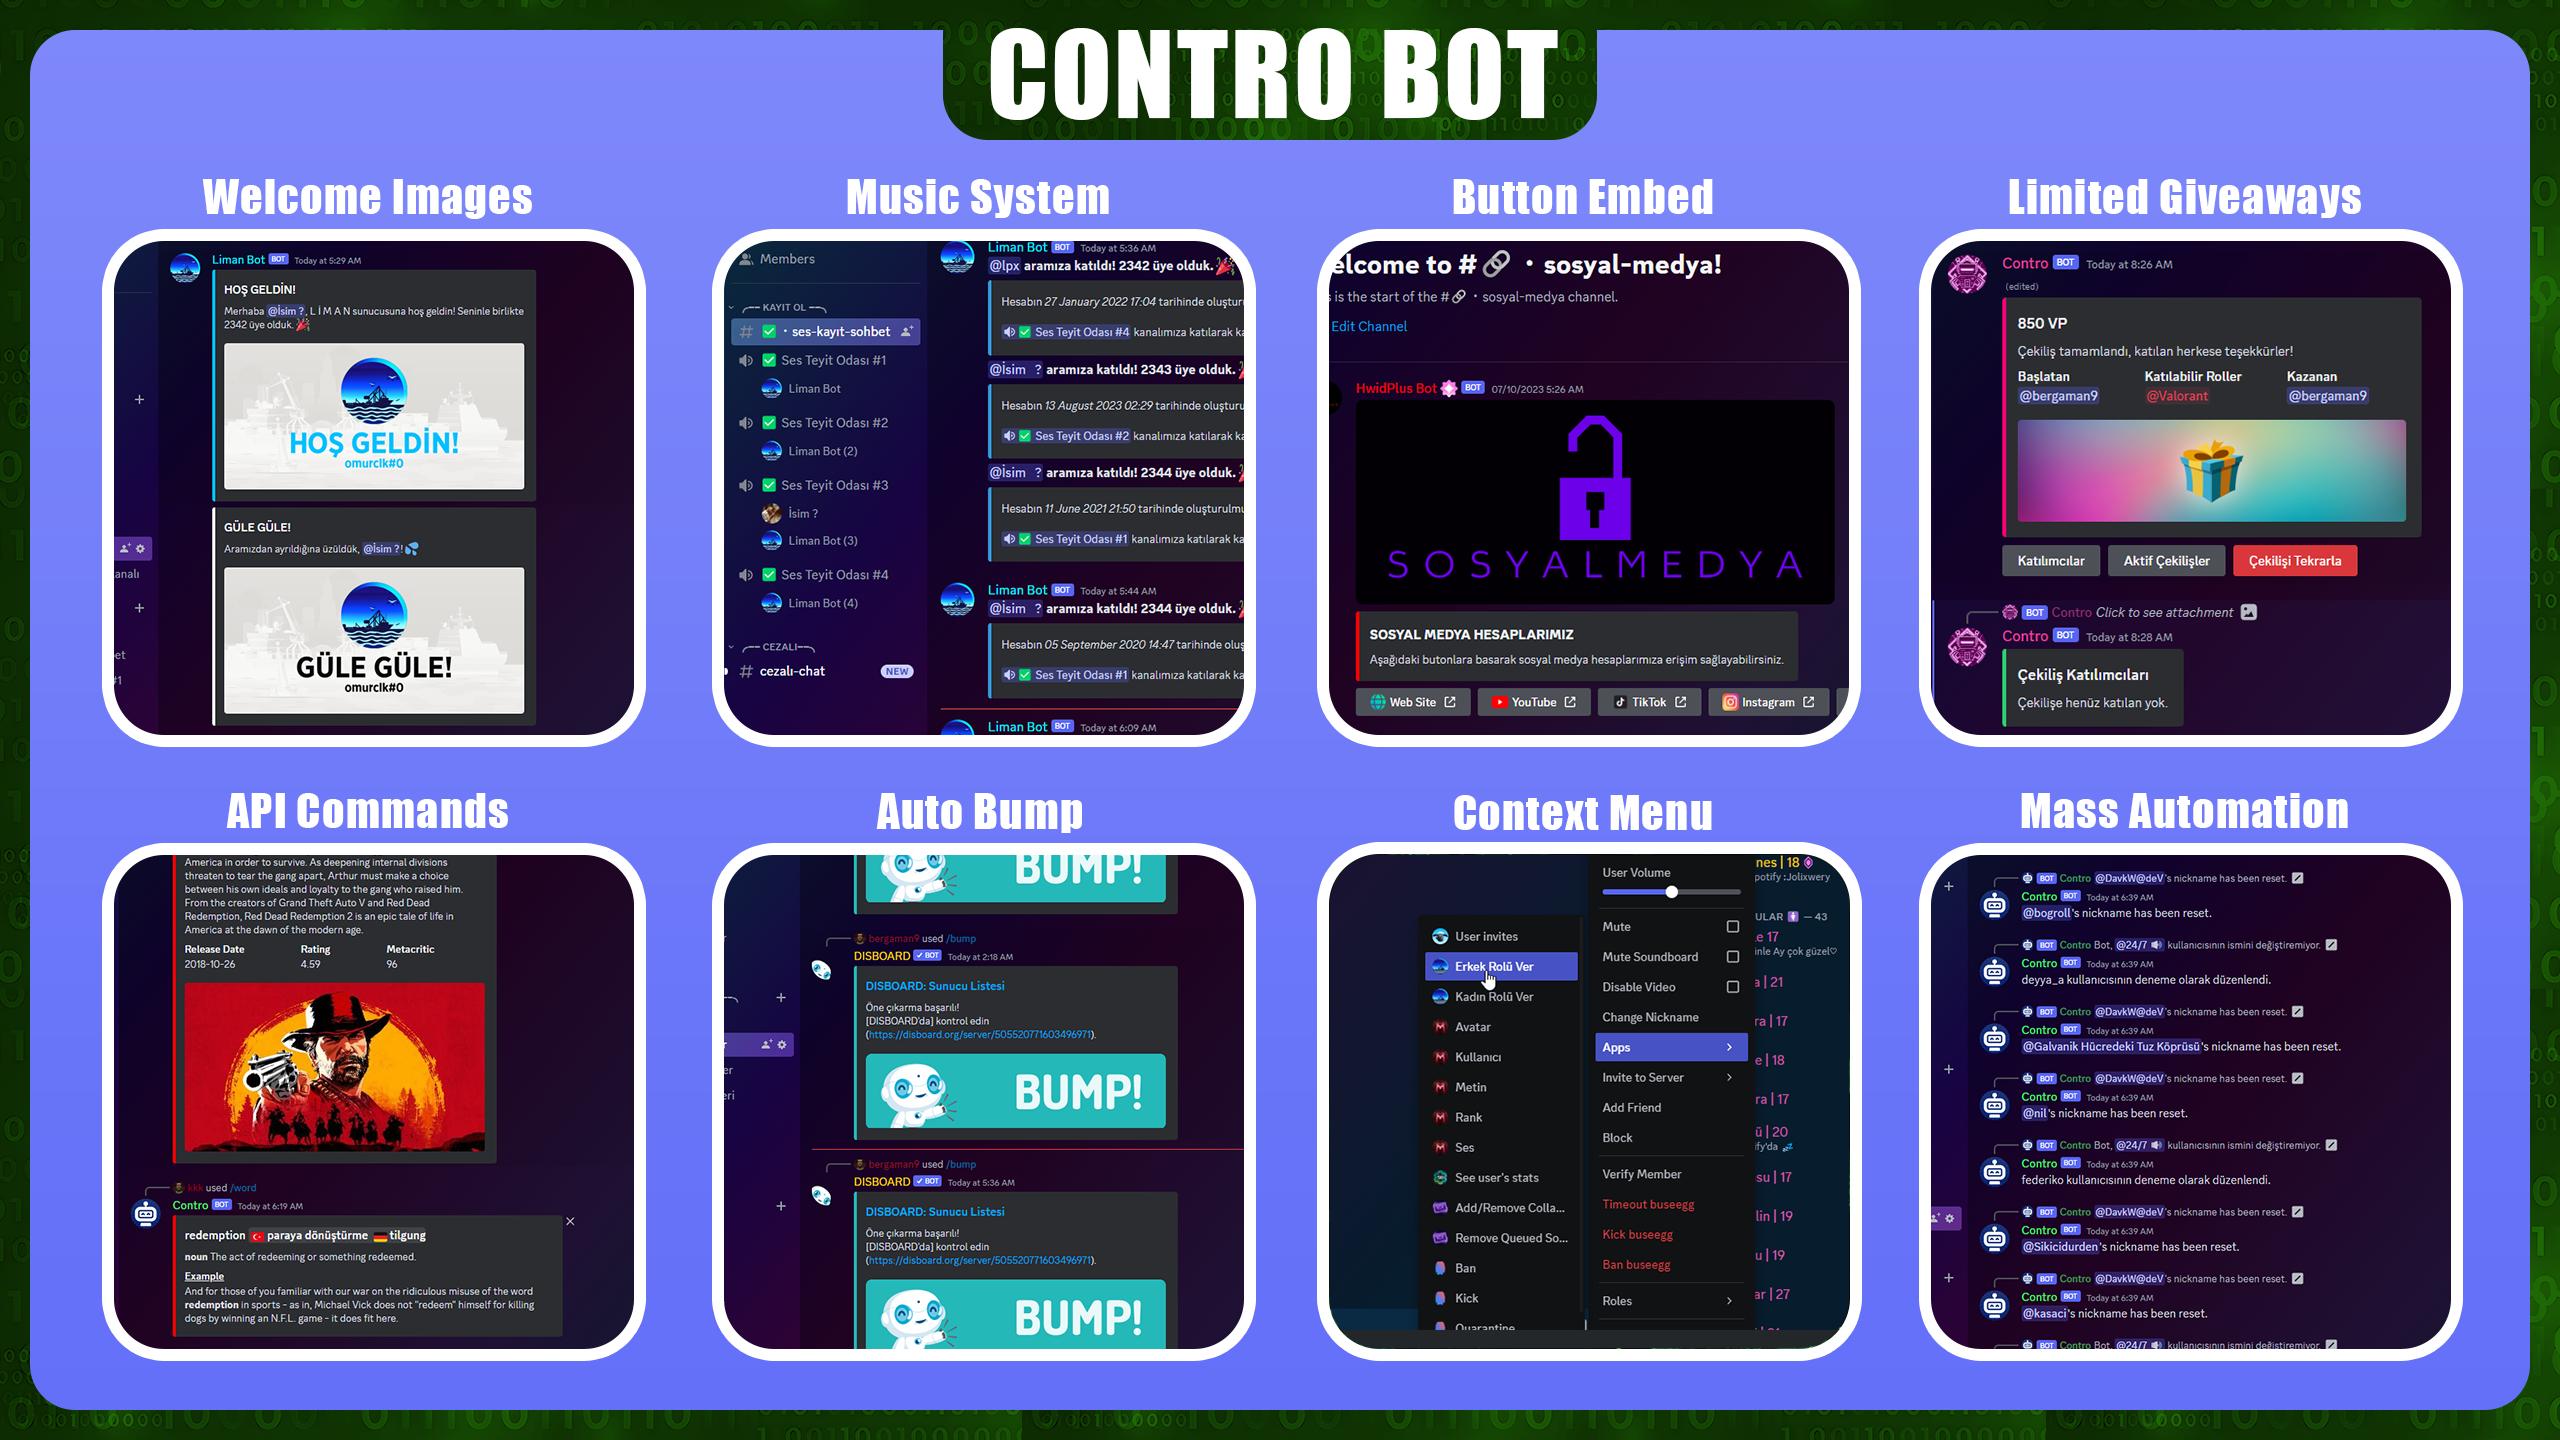 contro bot features